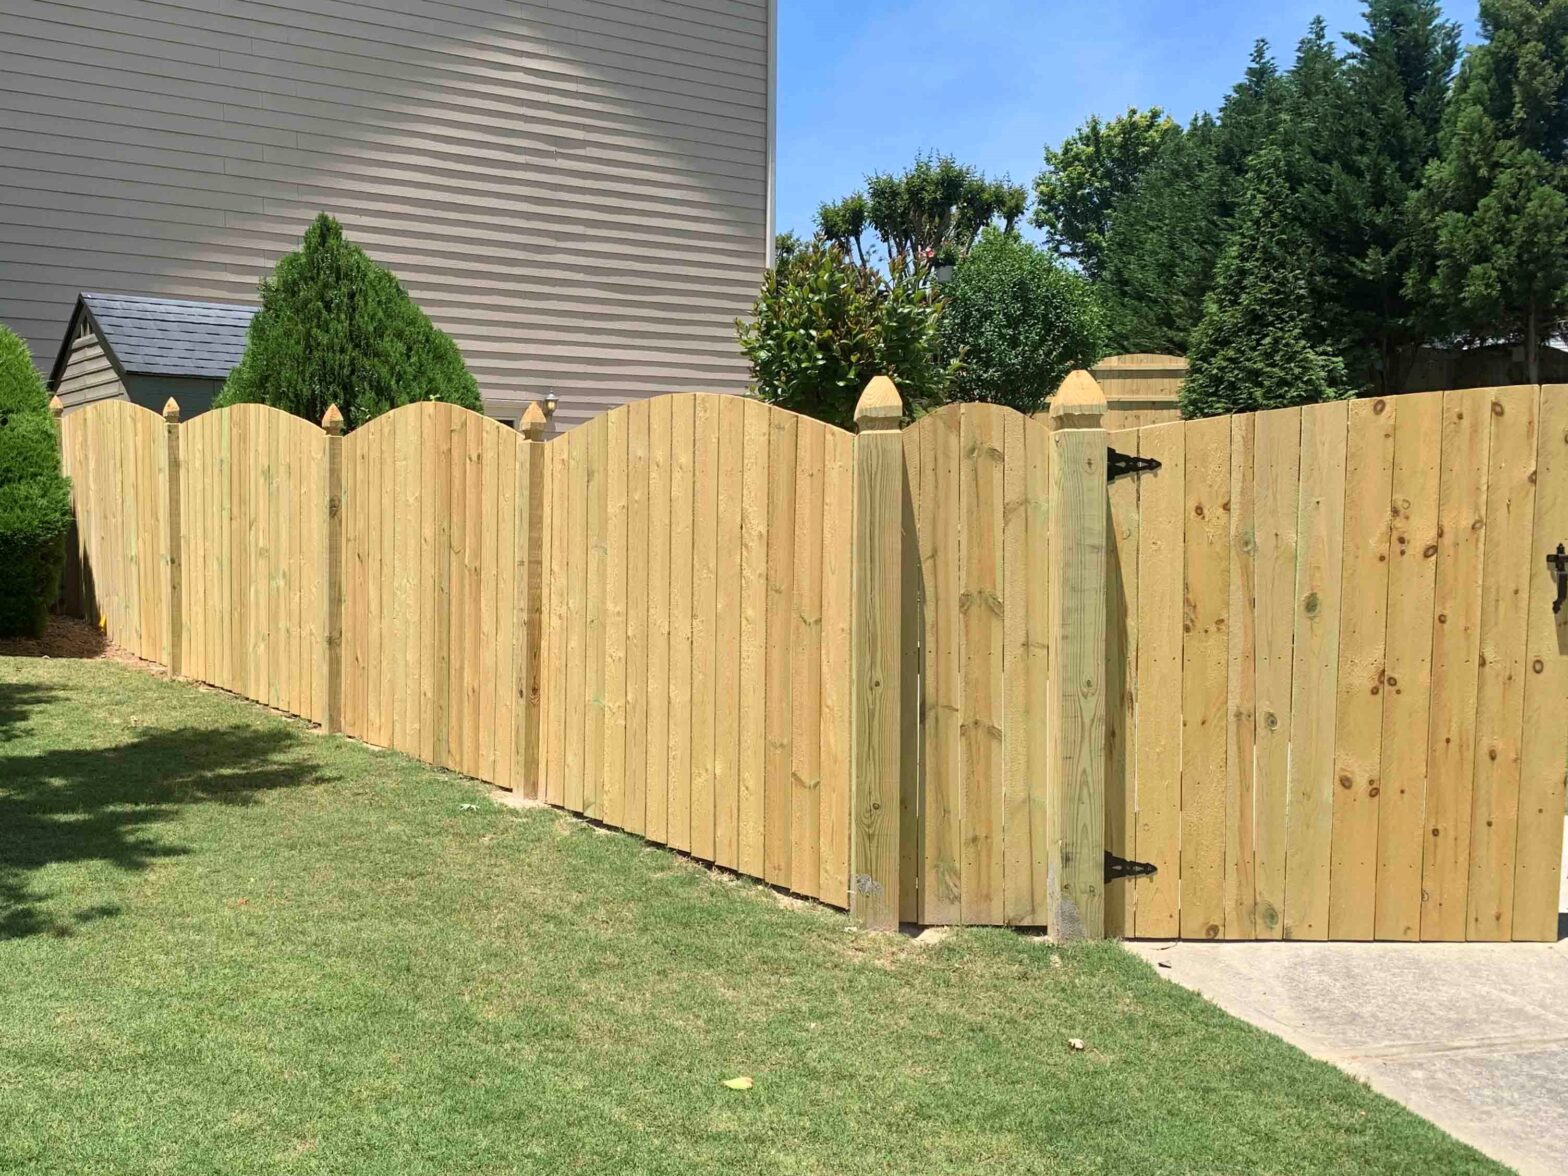 Photo of a Wood Privacy fence in Norcross, Georgia